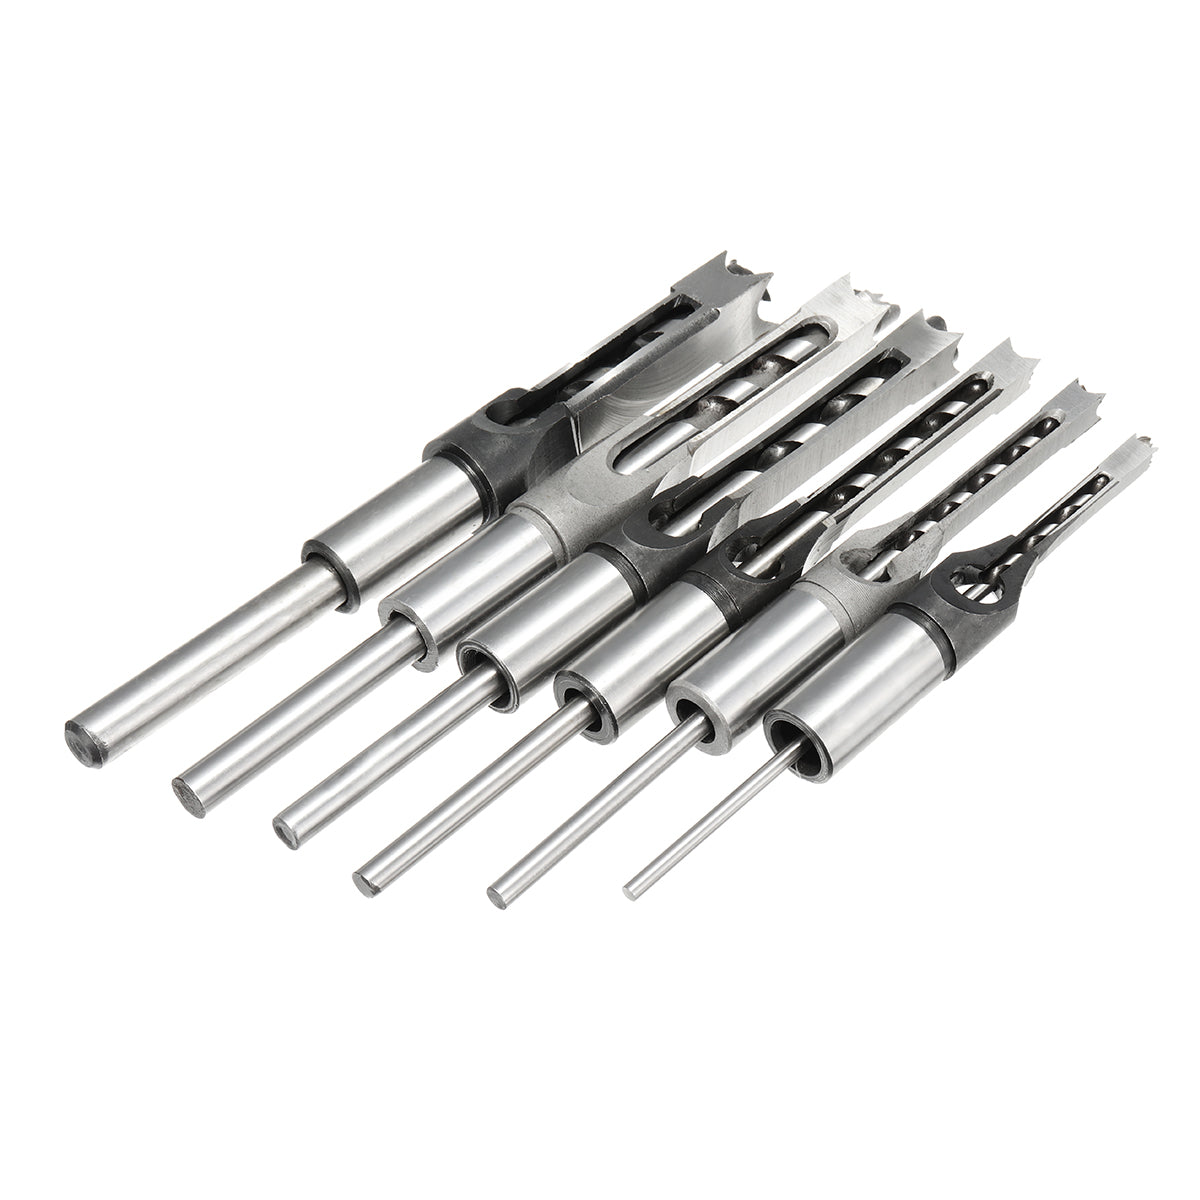 6pcs 6-16mm Woodworking Square Hole Drill Bit Set Mortising Chisel Auger Drill 6/8/9.5/12.7/14/16mm